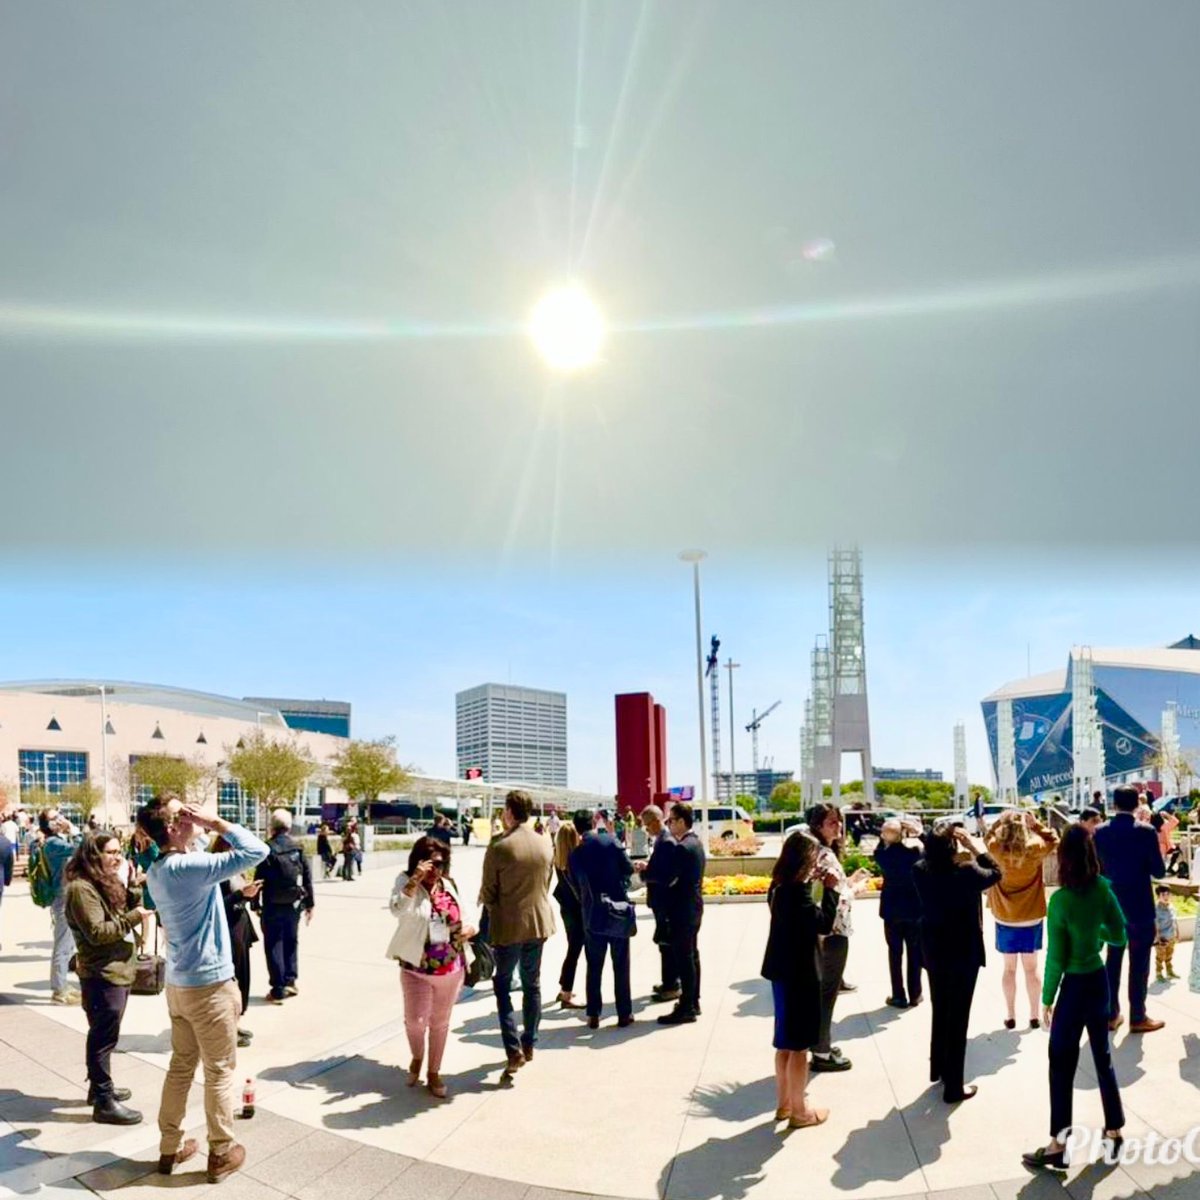 Hot ☀️ session at #ACC24 this afternoon. It was not #Cardiology It was outside the @TheGICC conference venue #solareclipse in #Atlanta ☀️😊 Cardiologists trying to get the magical view. #CardioEd #CardioTwitter @ACCinTouch #SolarEclipse2024 #GlobalHealth